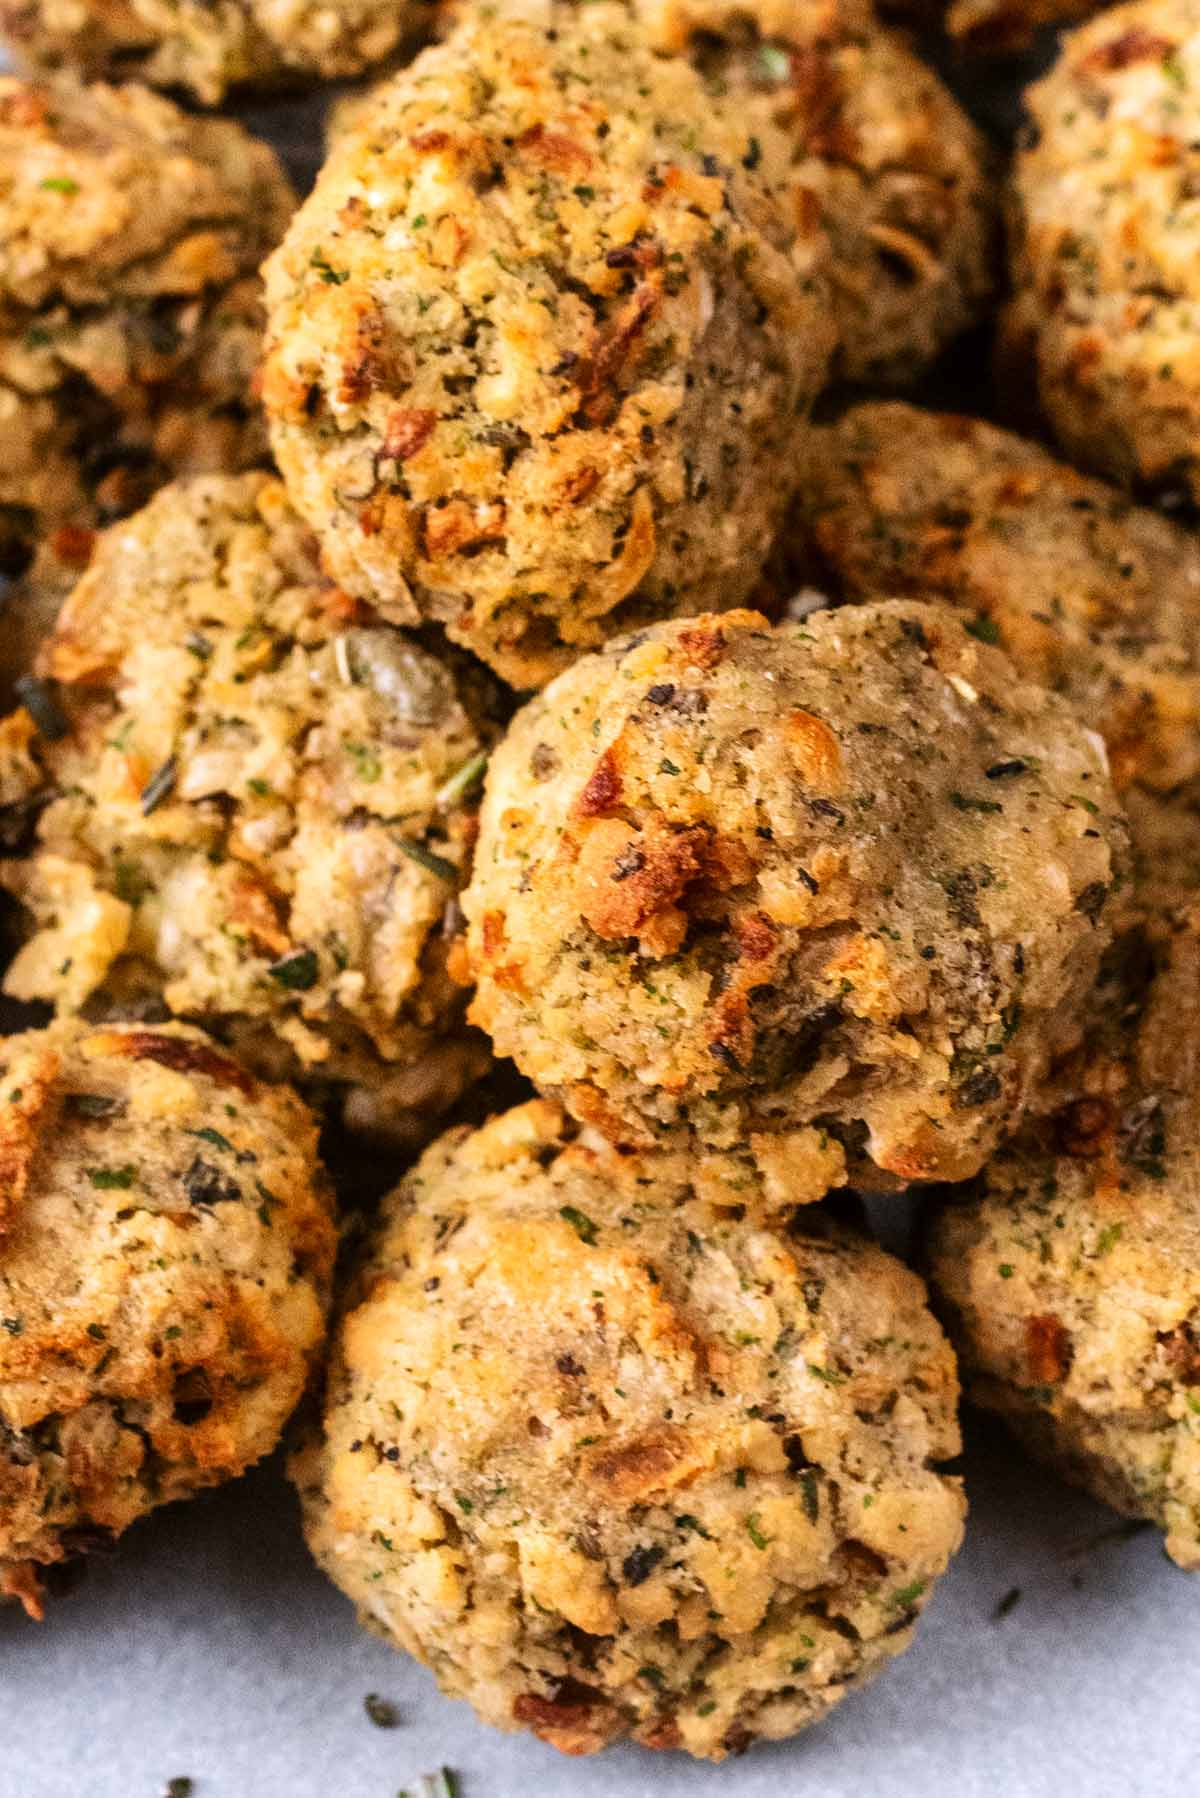 Stuffing balls piled up on a plate.